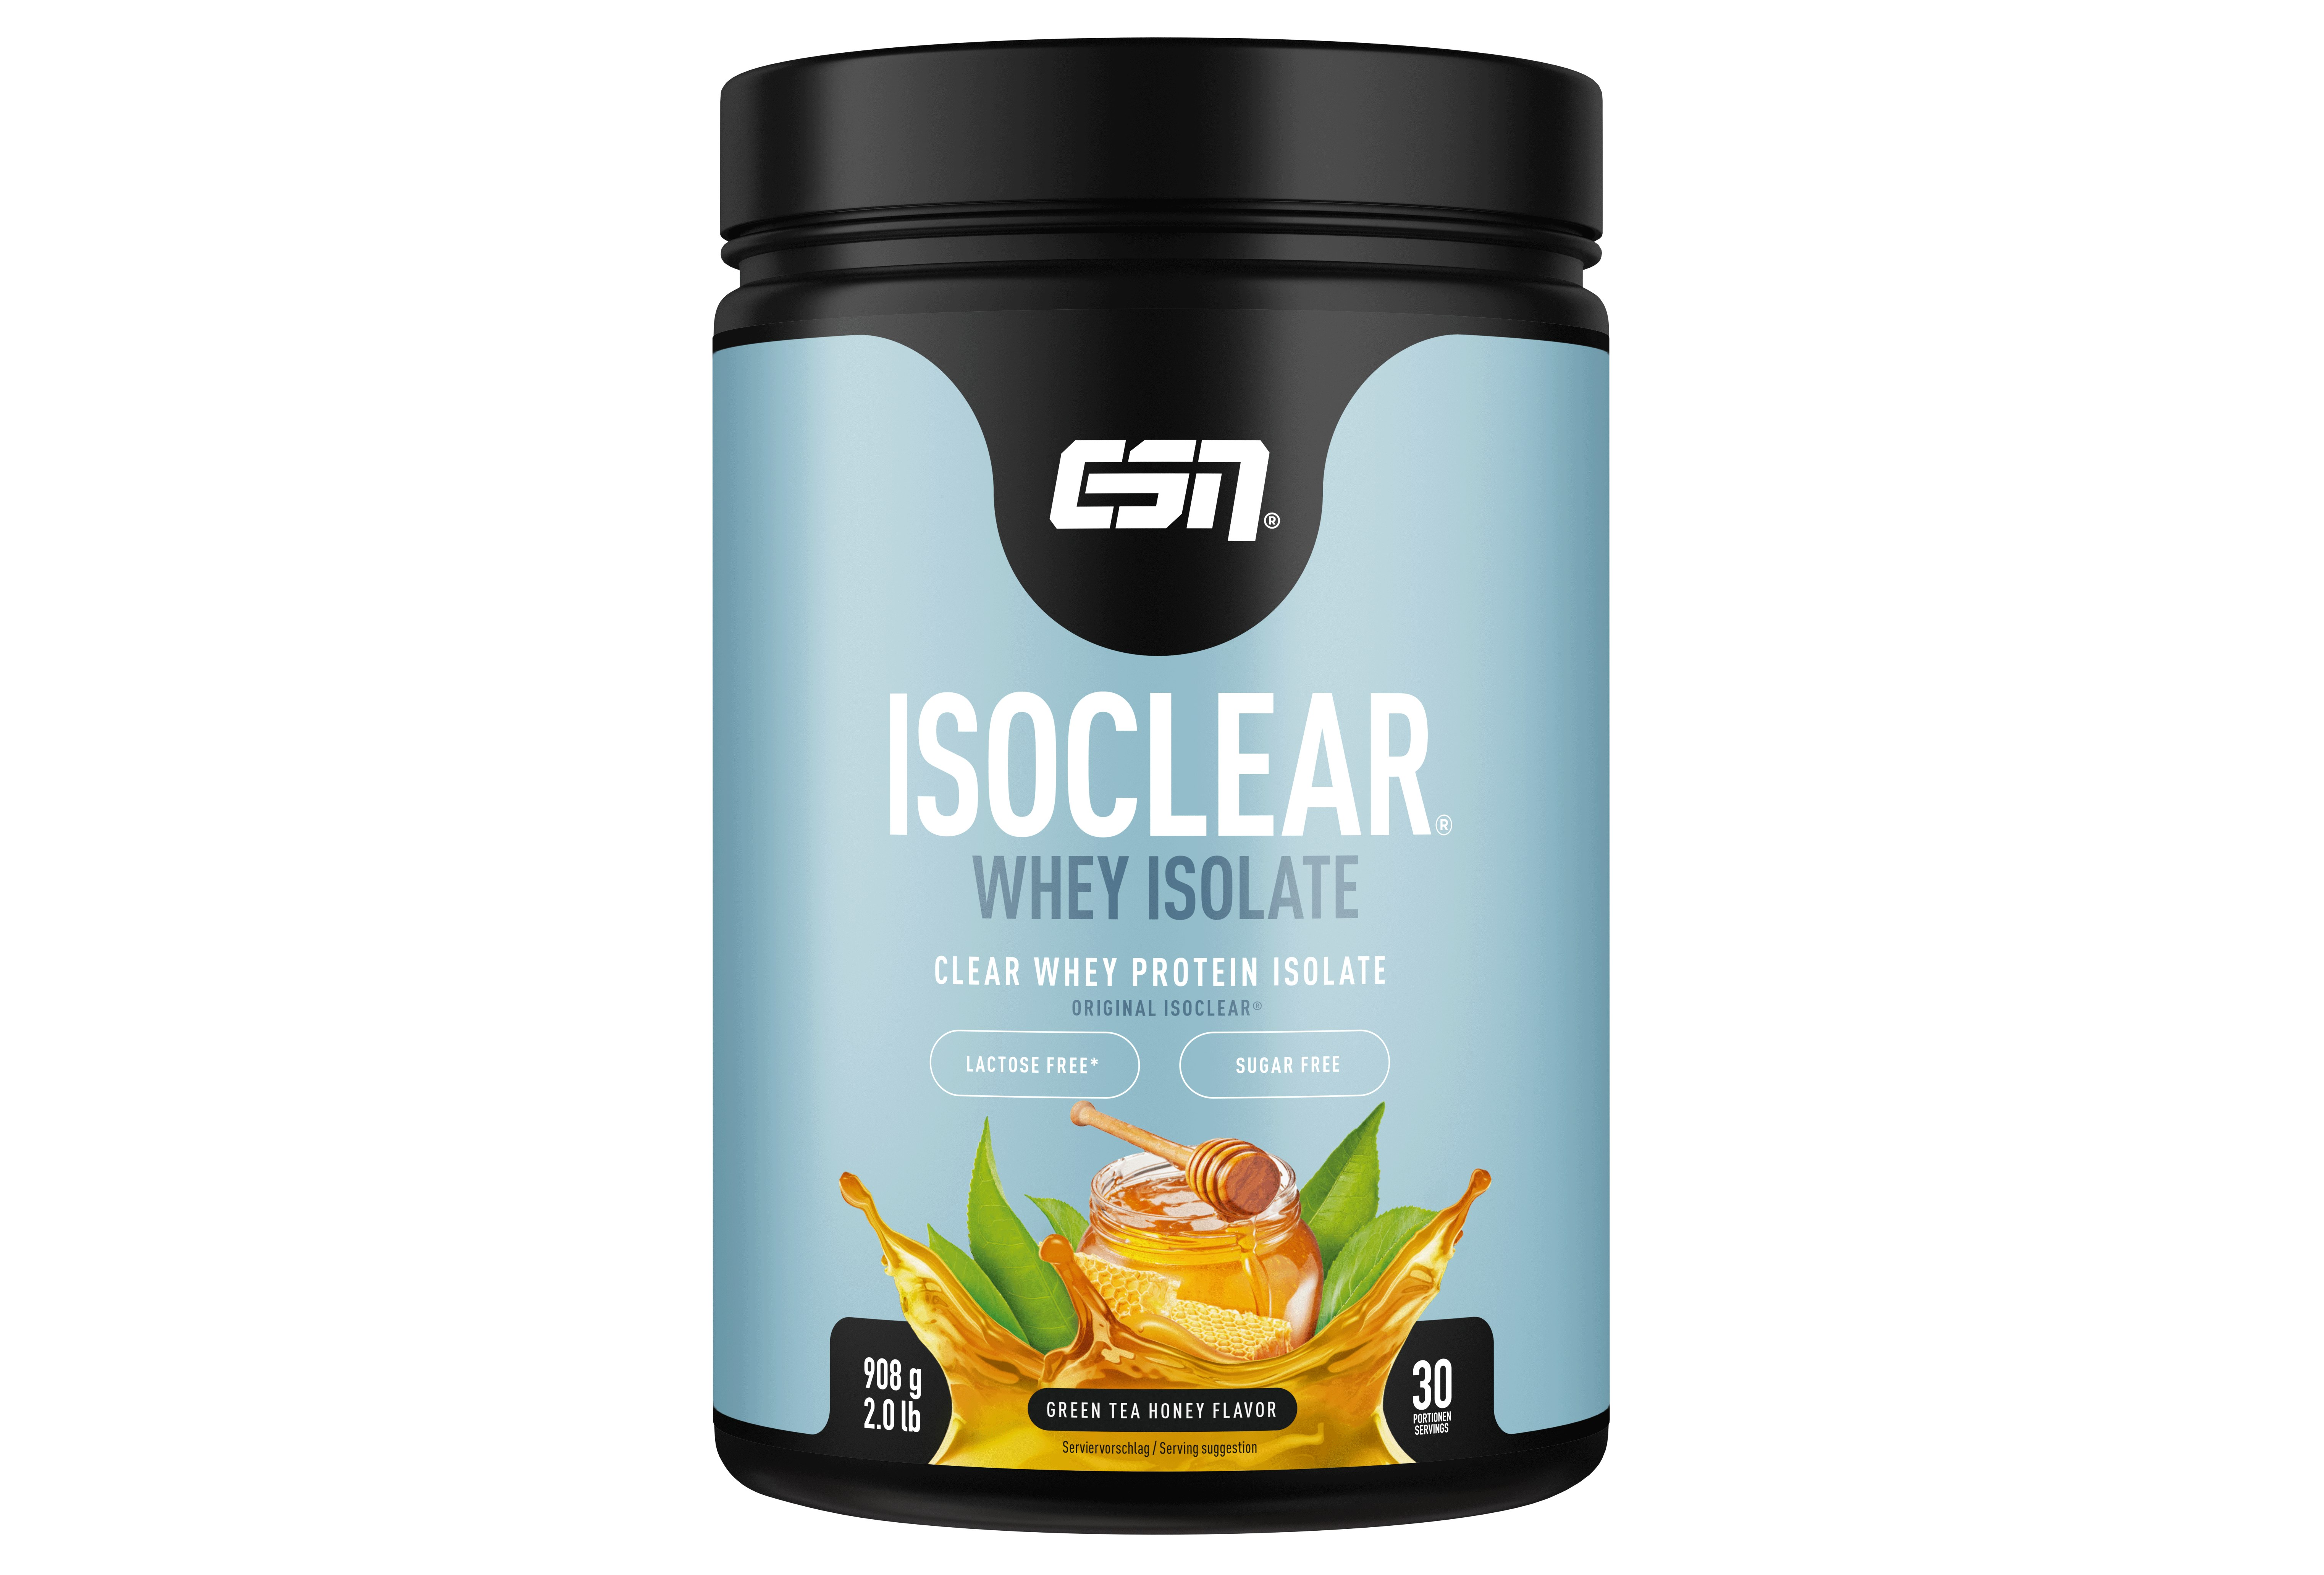 ESN ISOCLEAR – Unsere Top 5!